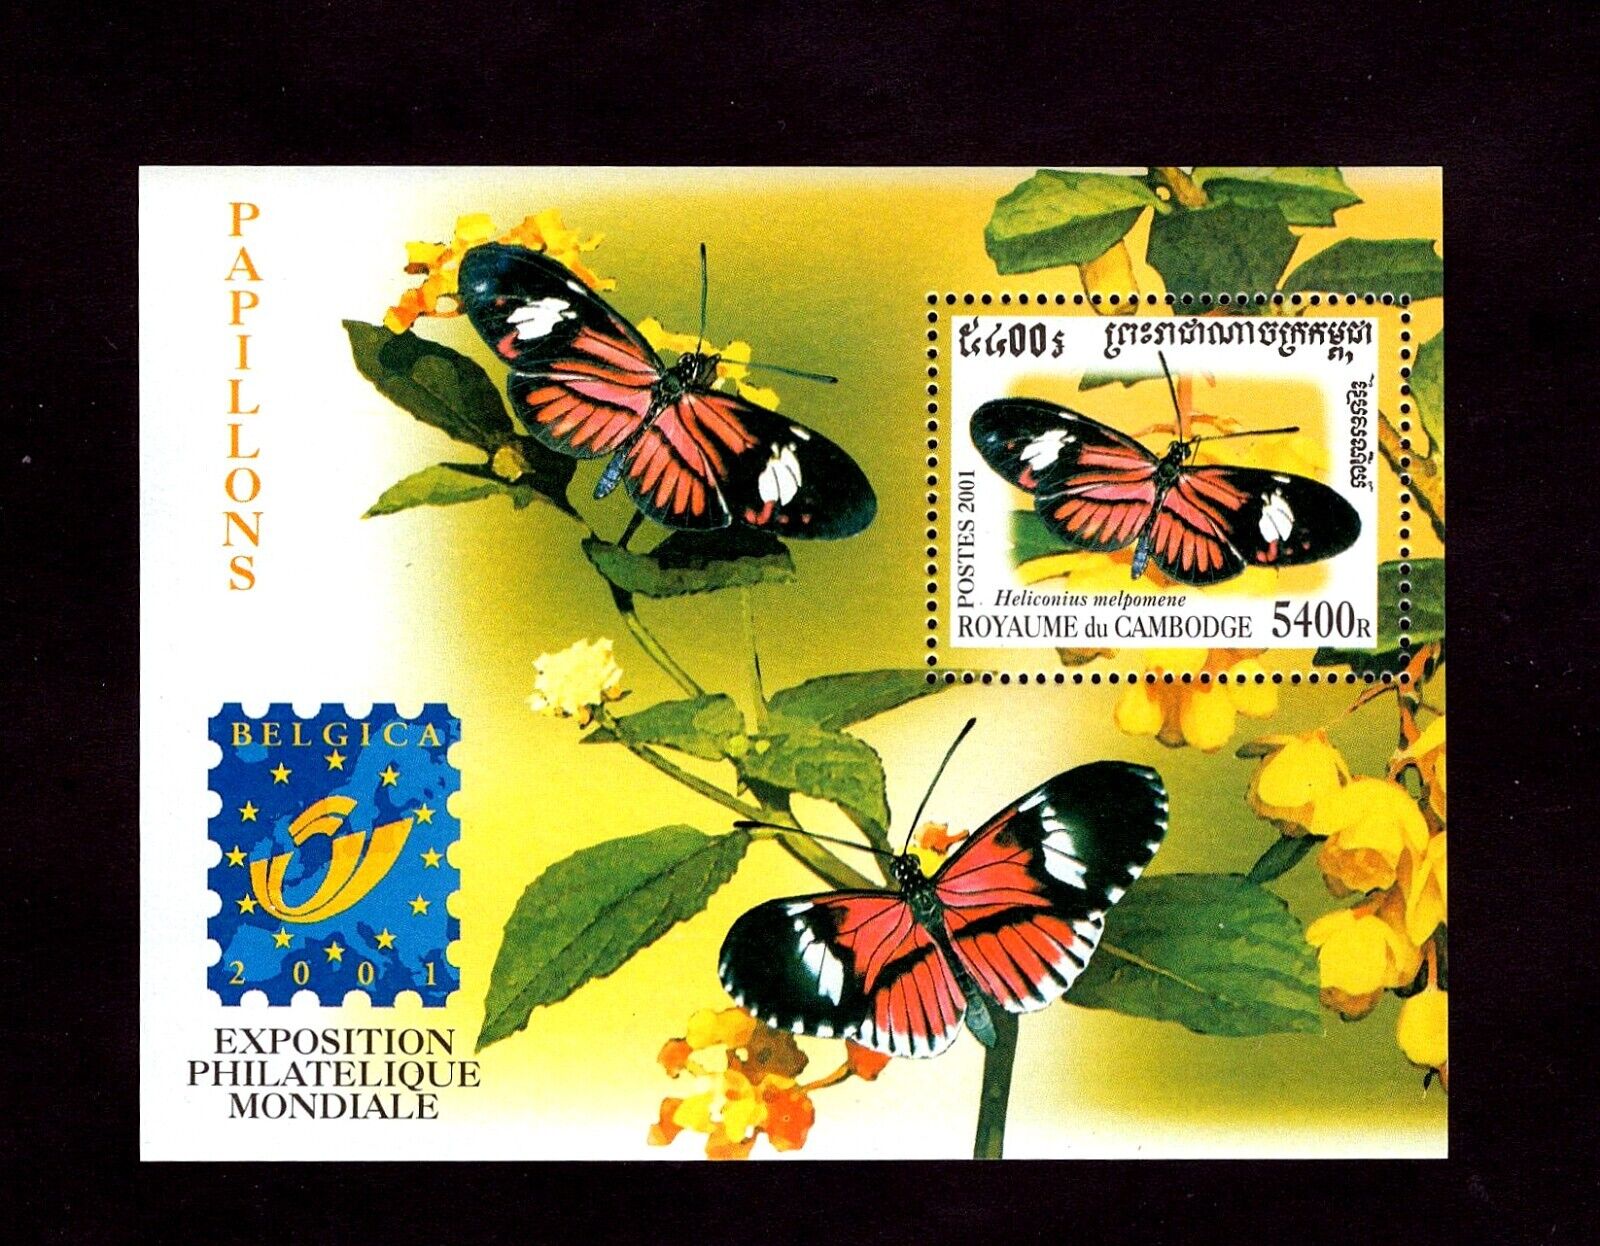 CAMBODIA - 2001 - BUTTERFLIES - INSECTS - BELGICA STAMP EXPO - MINT MNH S/SHEET!